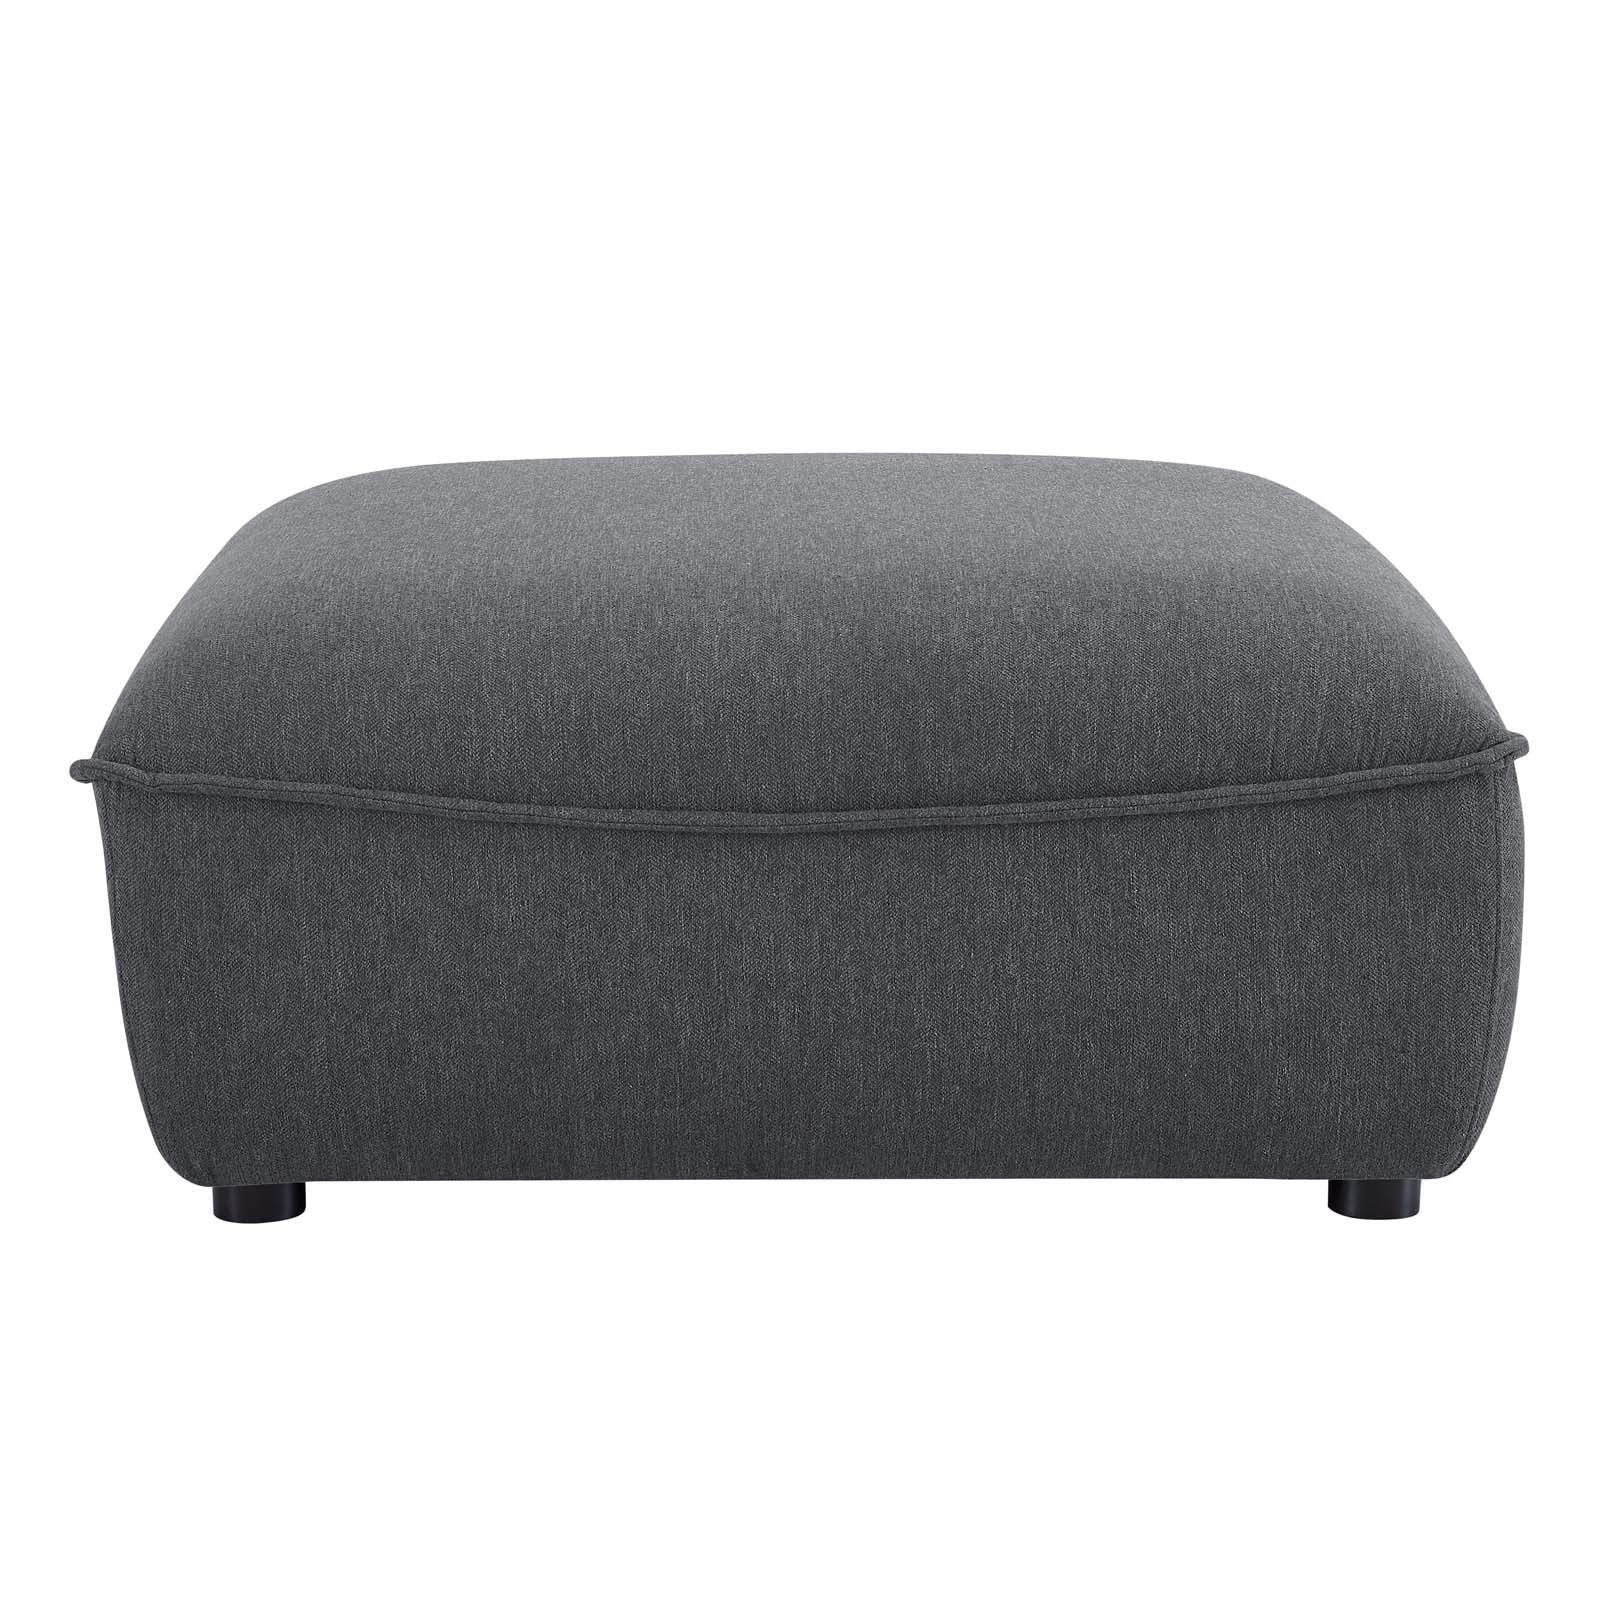 Modway Ottomans & Stools - Comprise Sectional Sofa Ottoman Charcoal